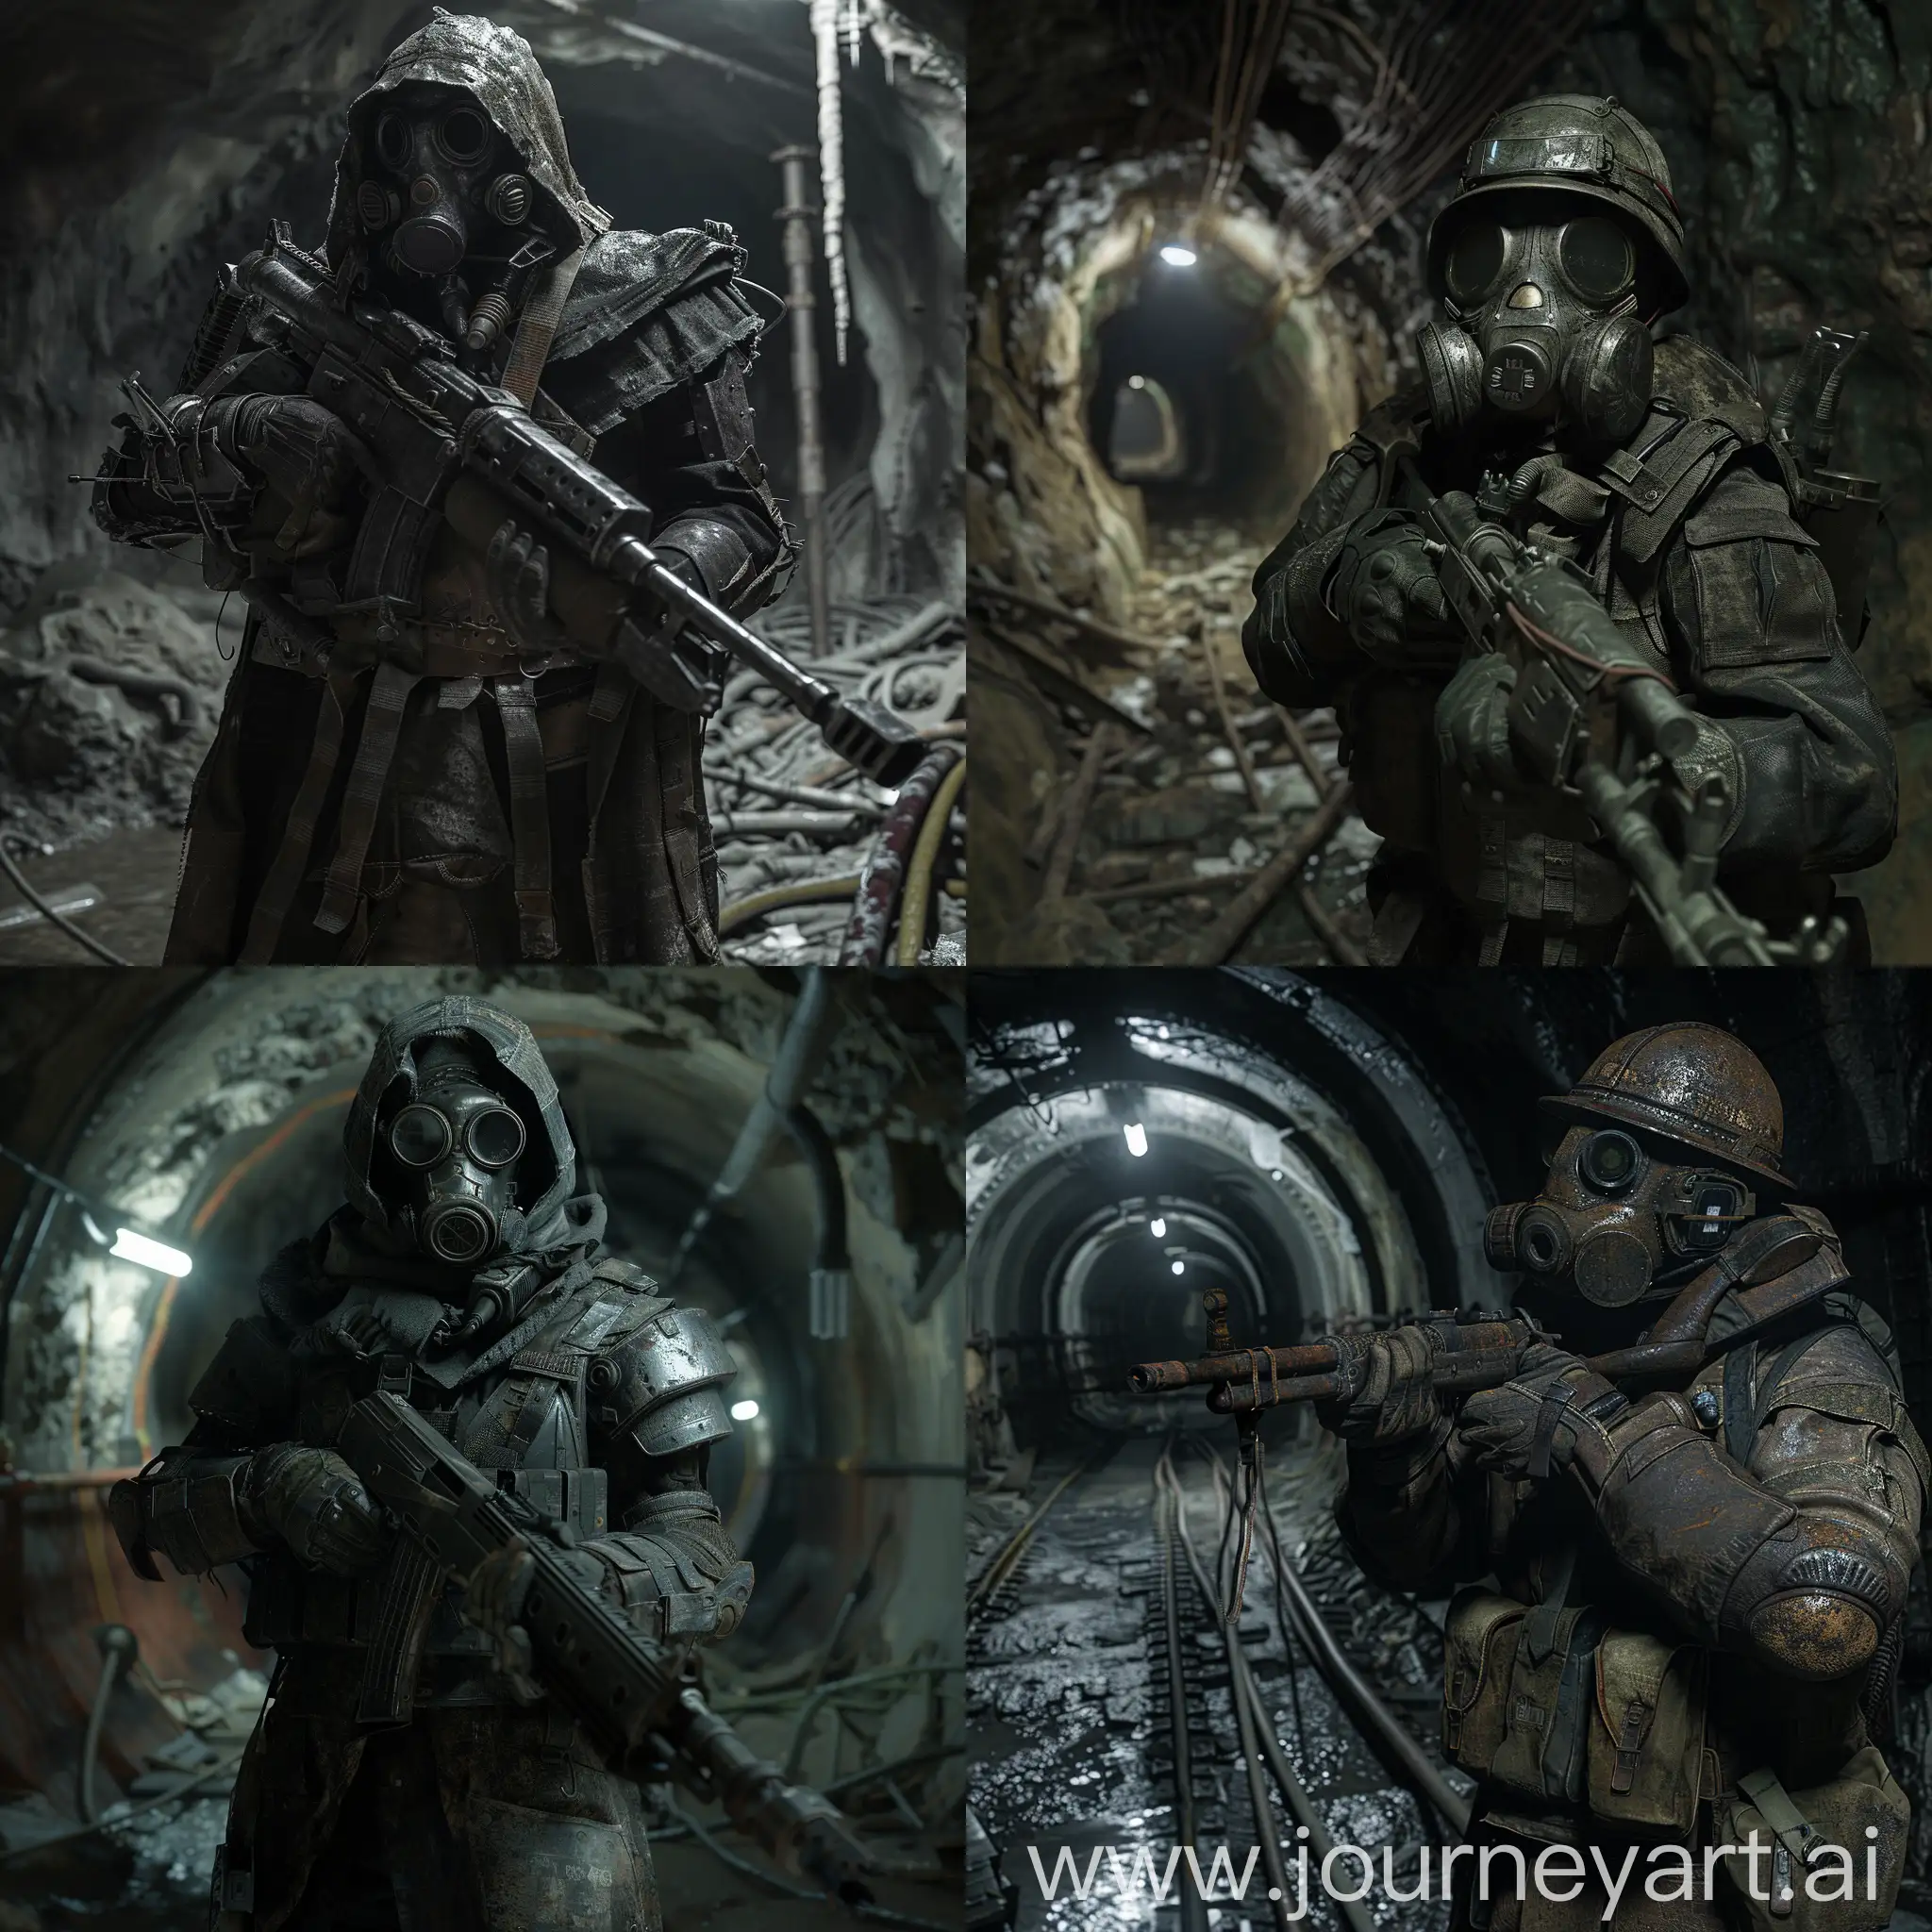 Survivor-in-PostApocalyptic-Metal-Armor-Suit-and-Gasmask-with-Soviet-Sniper-Rifle-in-Abandoned-Catacombs